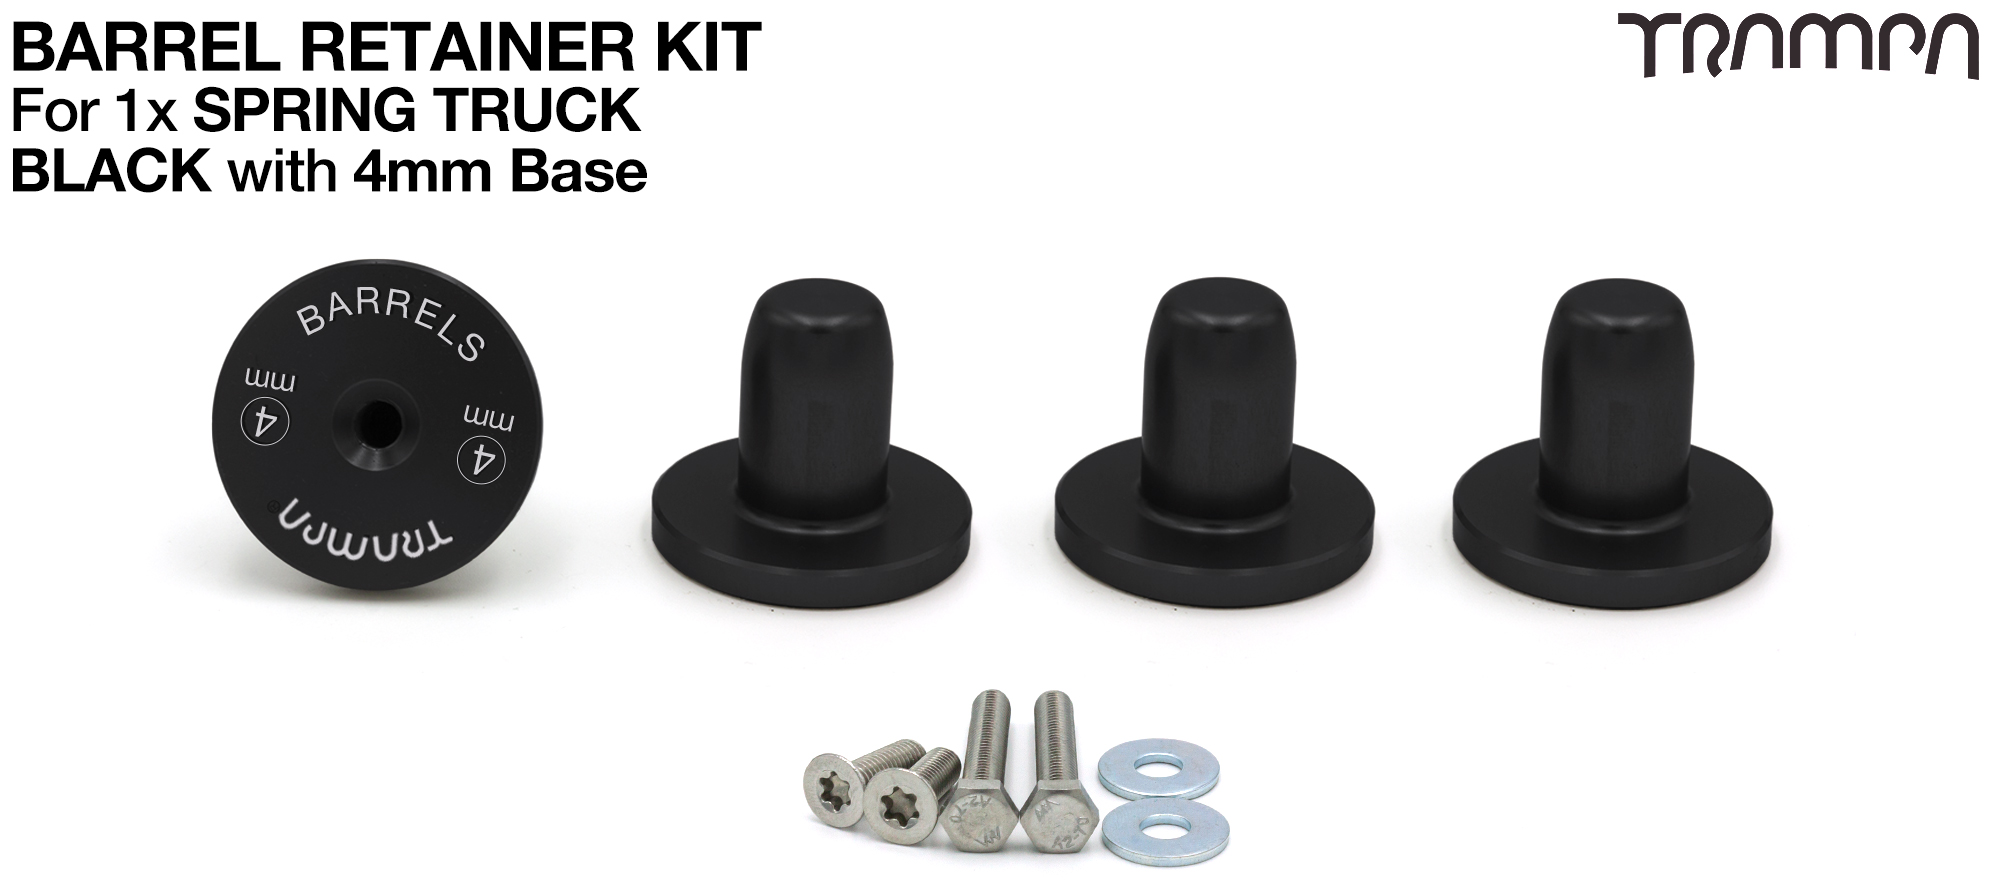 BLACK Barrel RETAINERS x4 with 4mm Base 